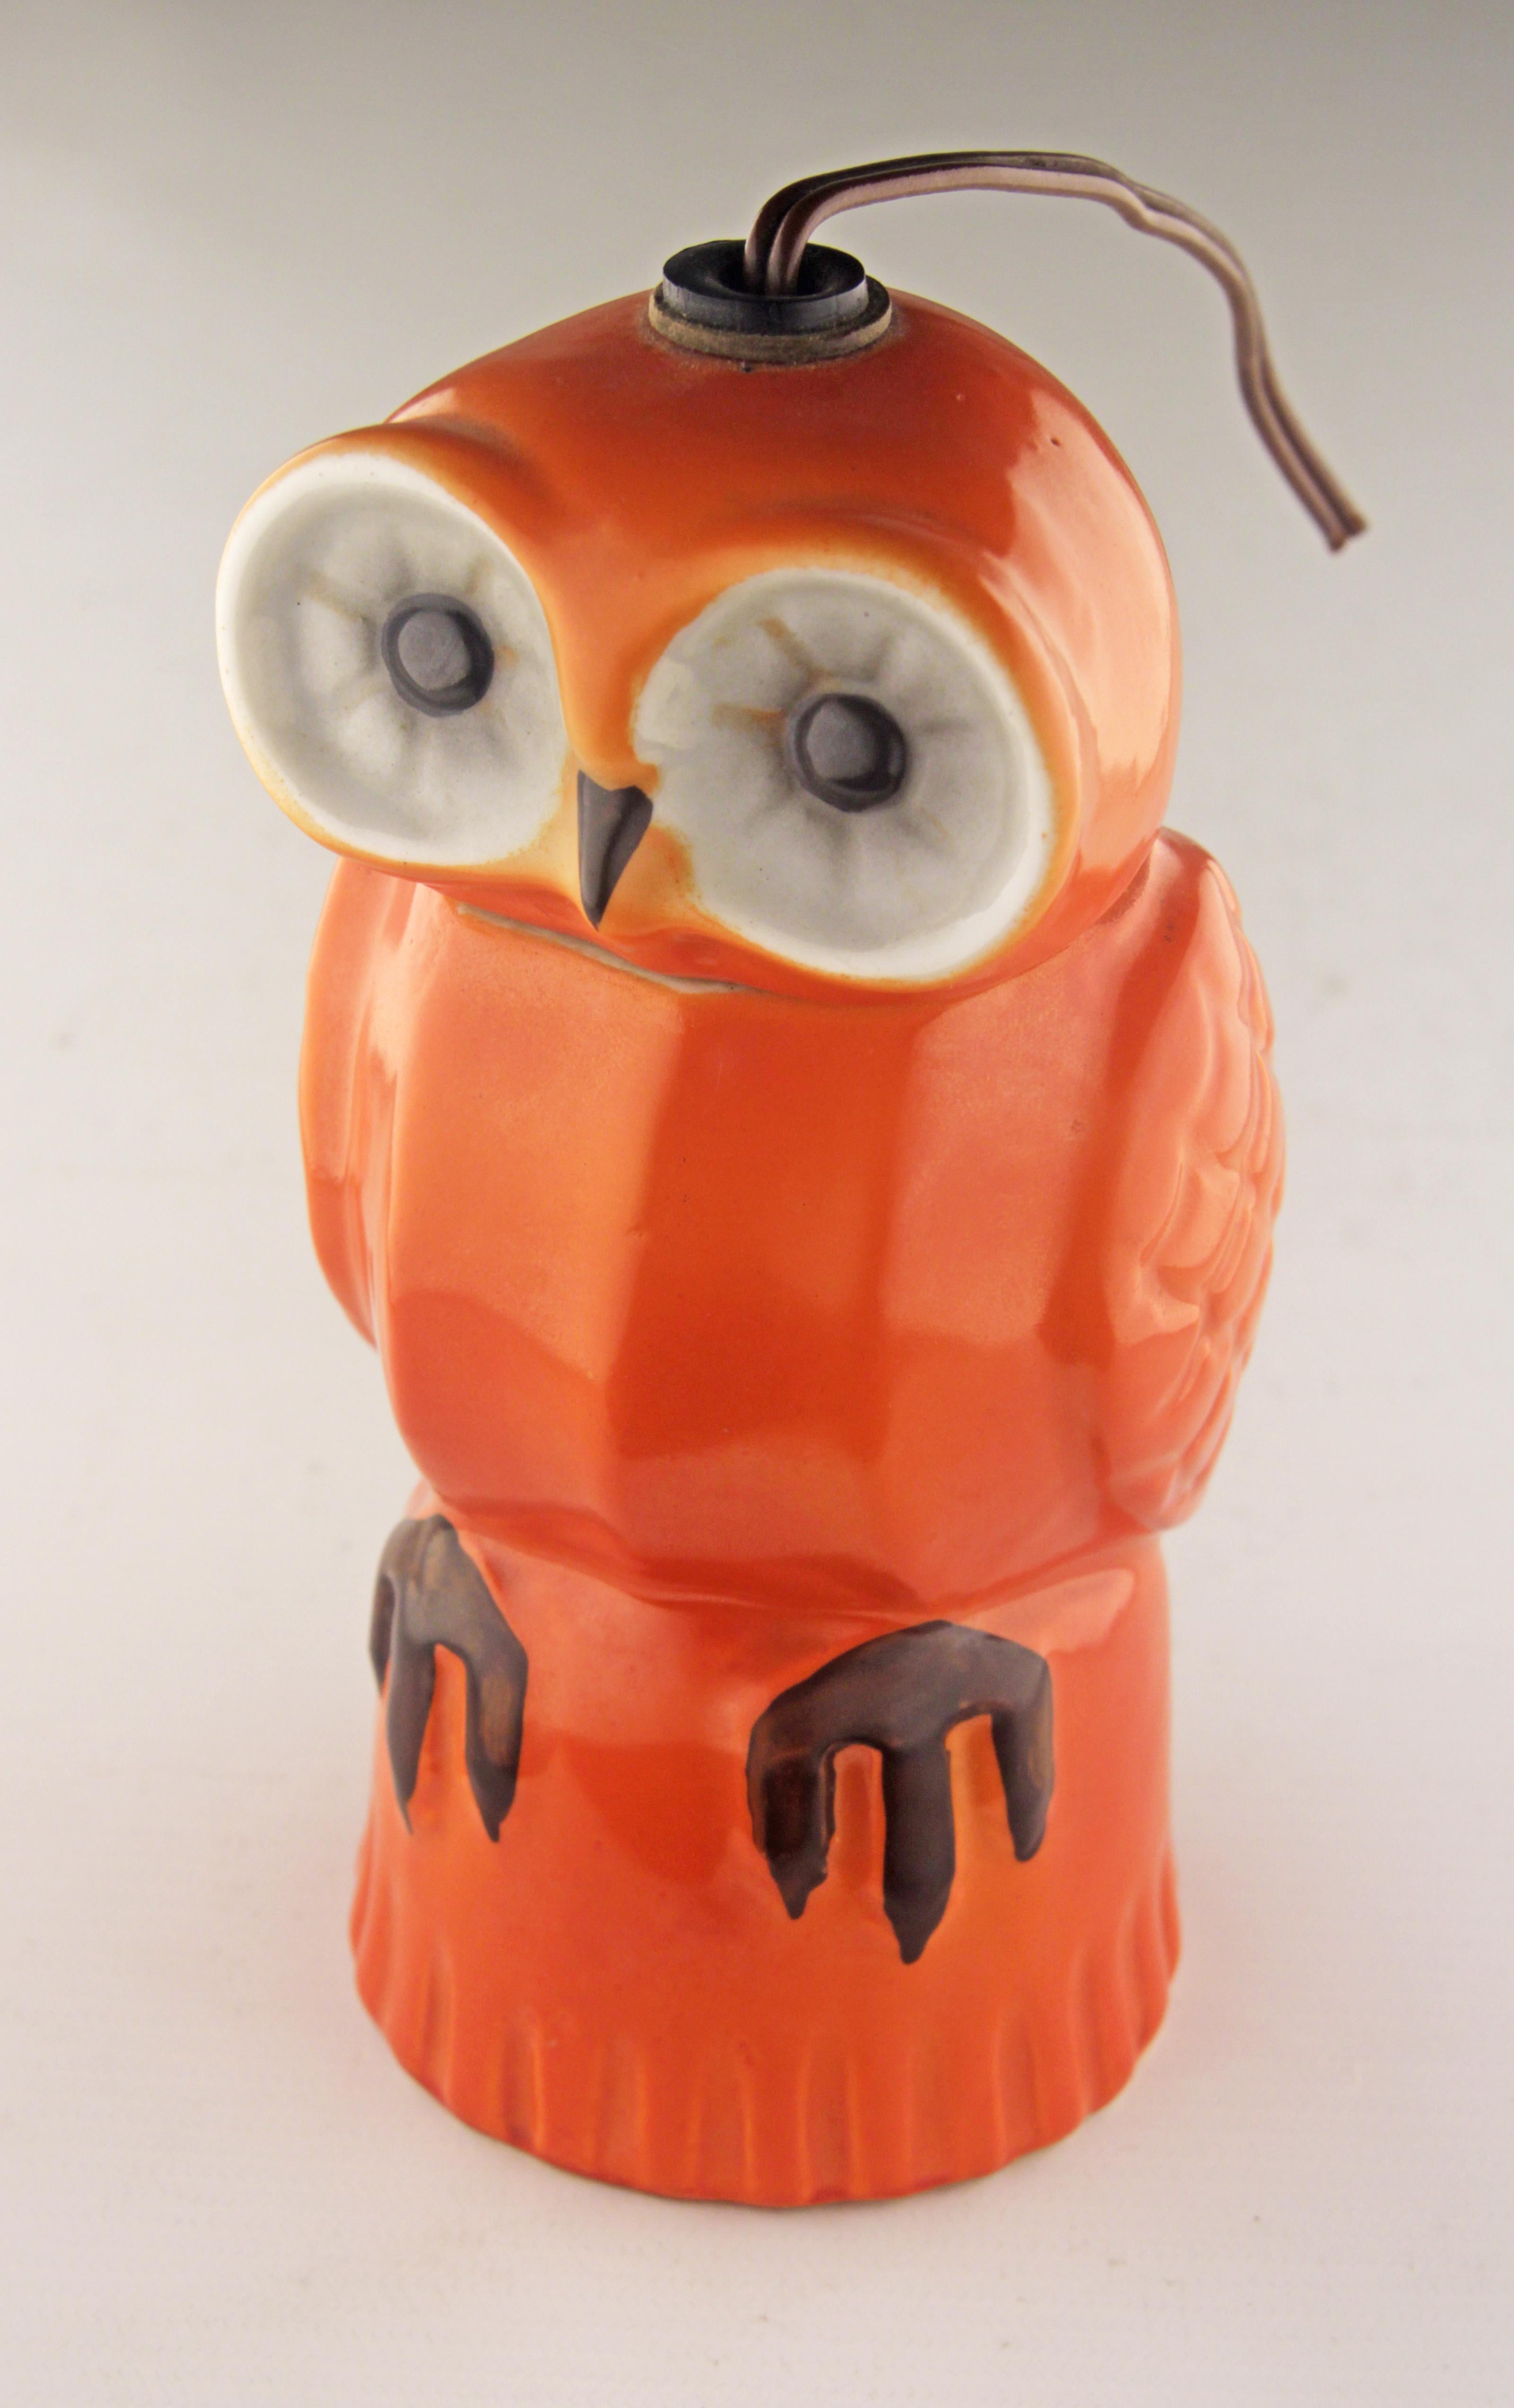 Art Déco enameled porcelain owl-shapped perfume lamp manufactured by german company Aerozon

By: Aerozon
Material: porcelain, ceramic, enamel, paint
Technique: molded, pressed, enameled, painted, hand-painted, glazed
Dimensions: 3 in x 6 in
Date: